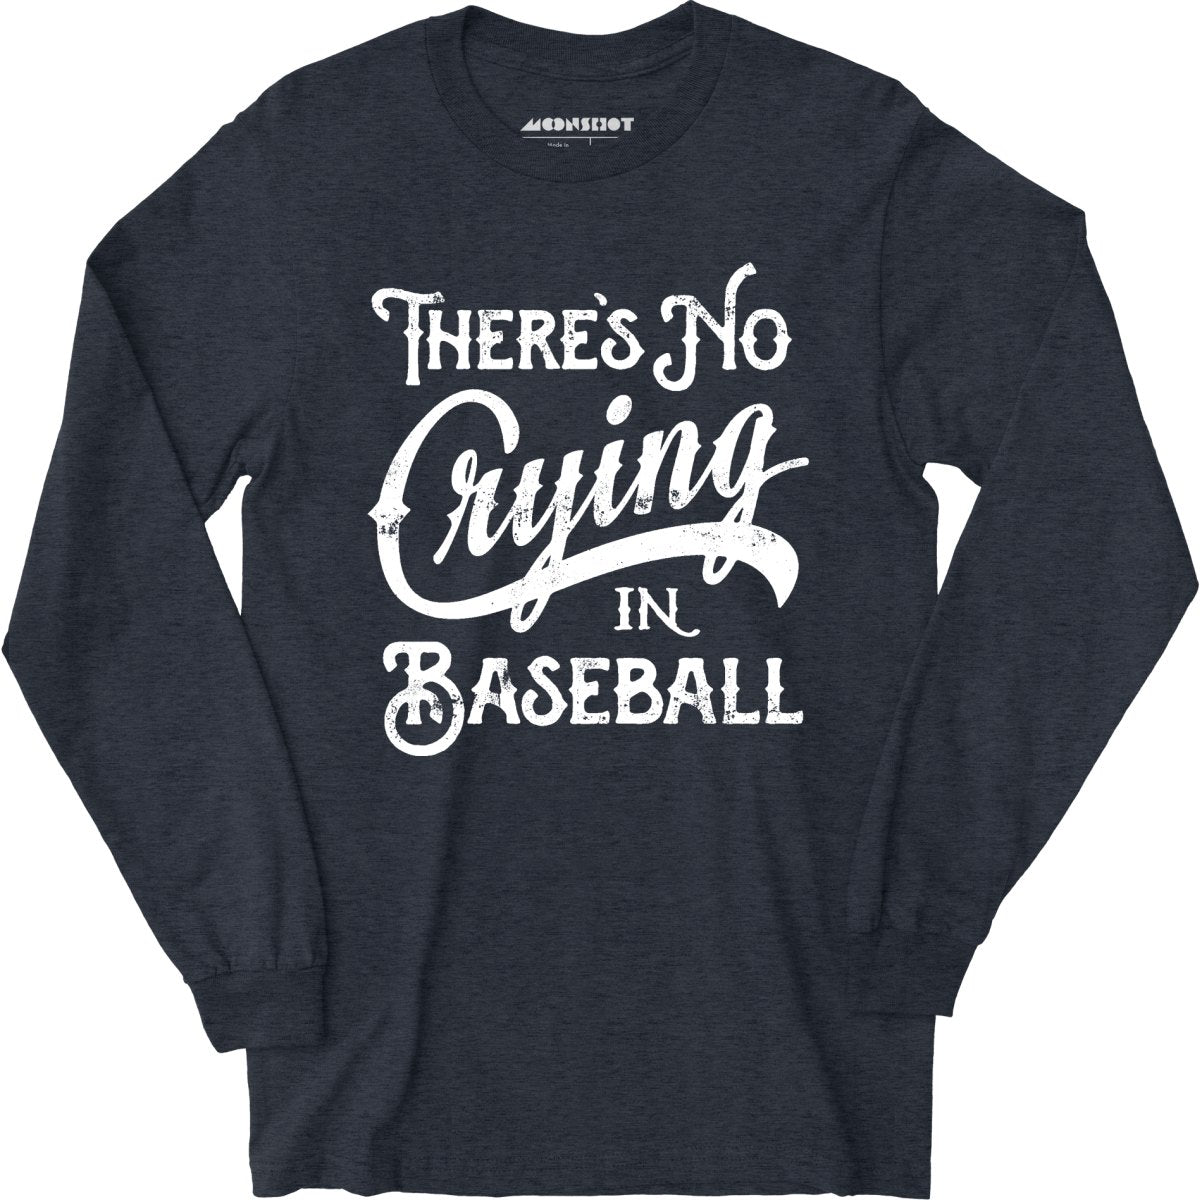 There's No Crying in Baseball - Long Sleeve T-Shirt